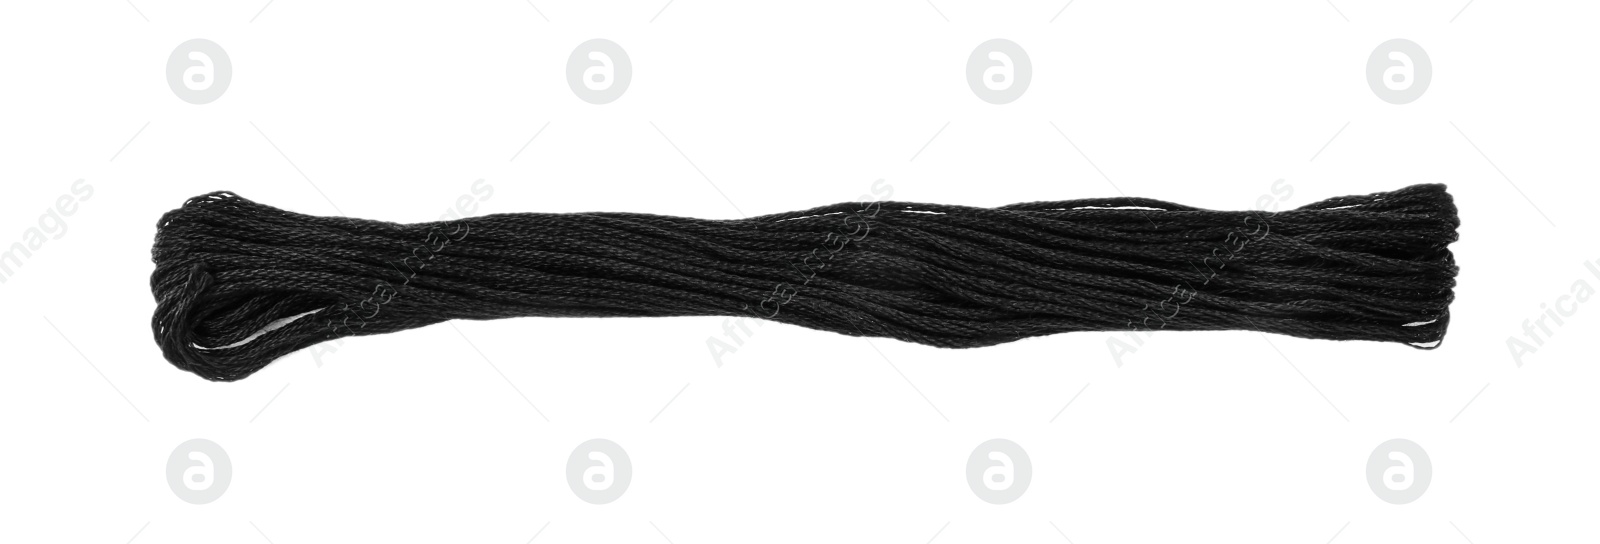 Photo of Bright black embroidery thread on white background